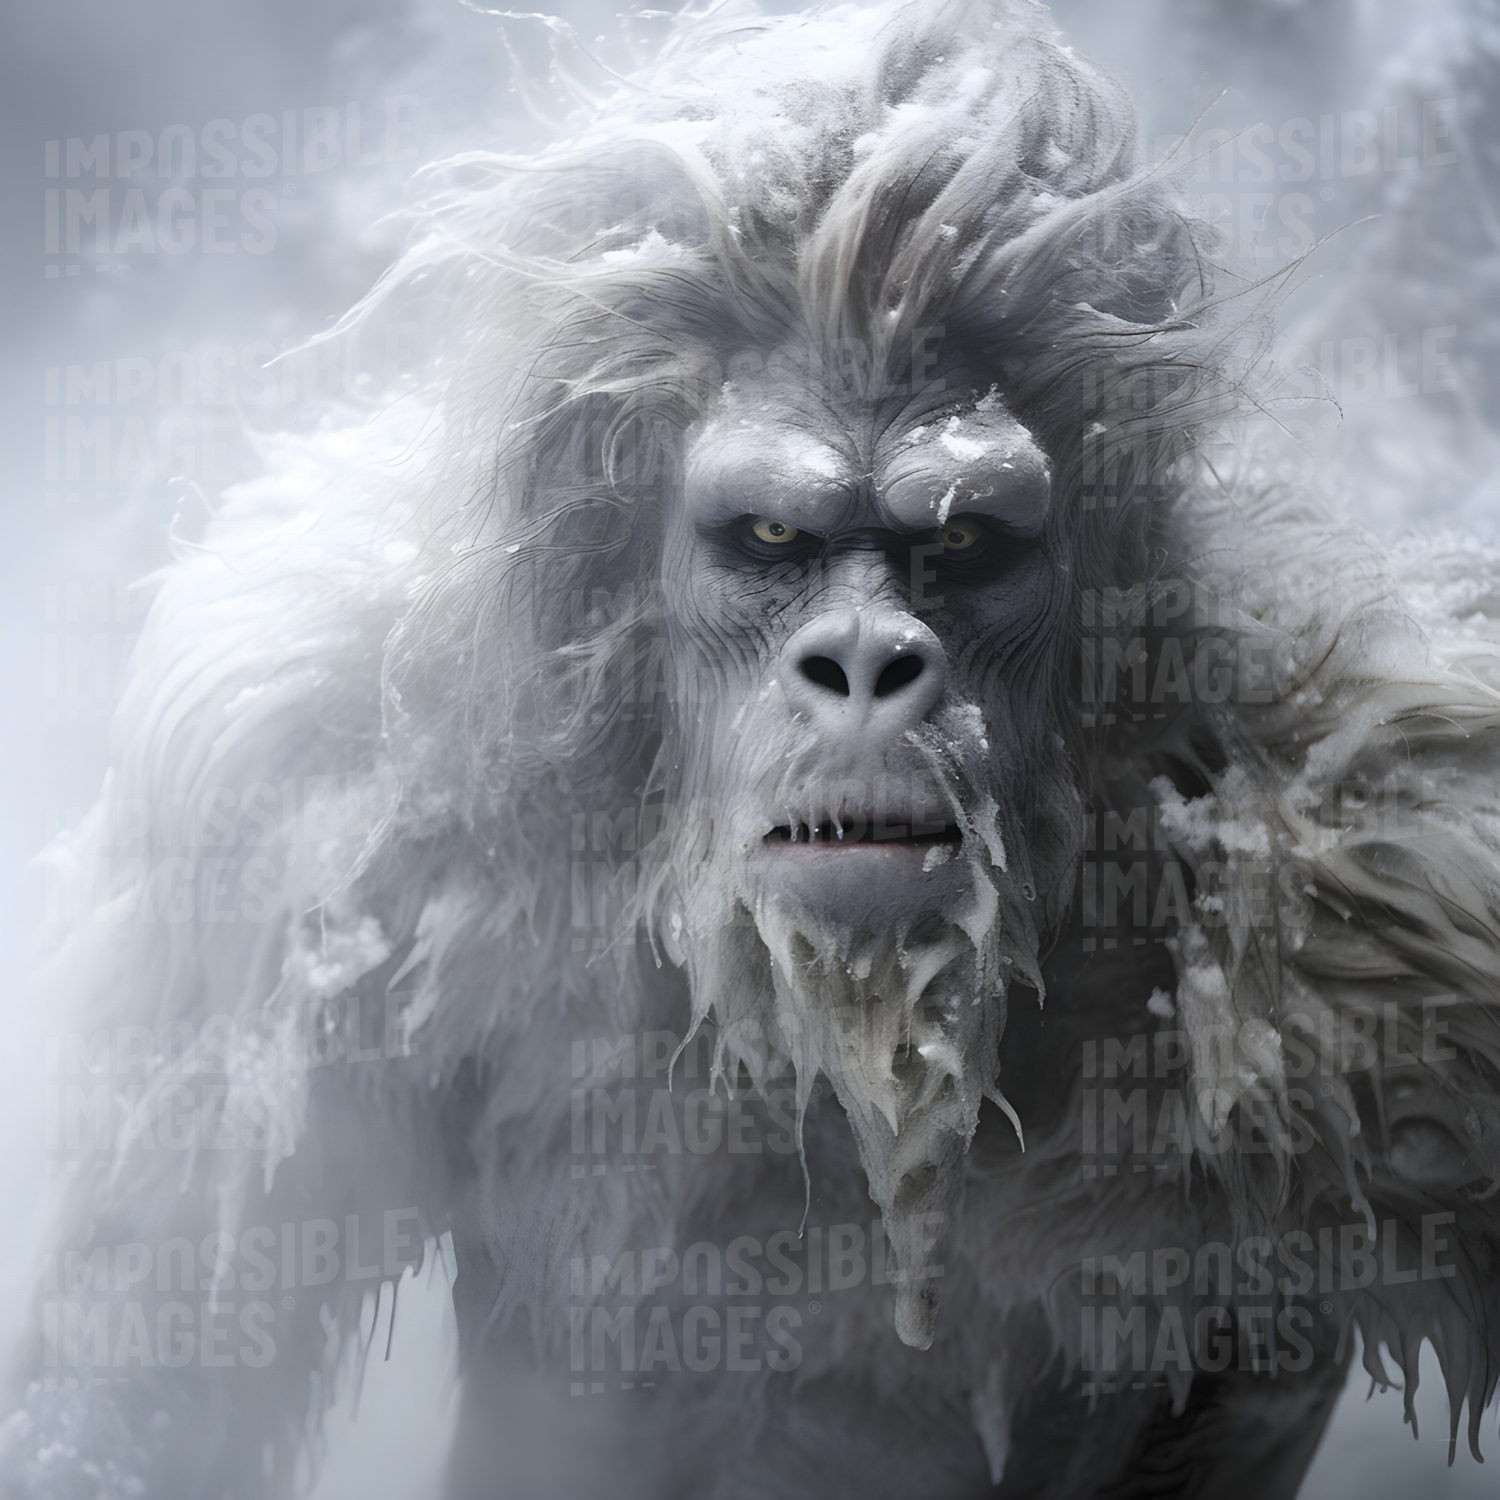 Angry yeti with frost-matted fur